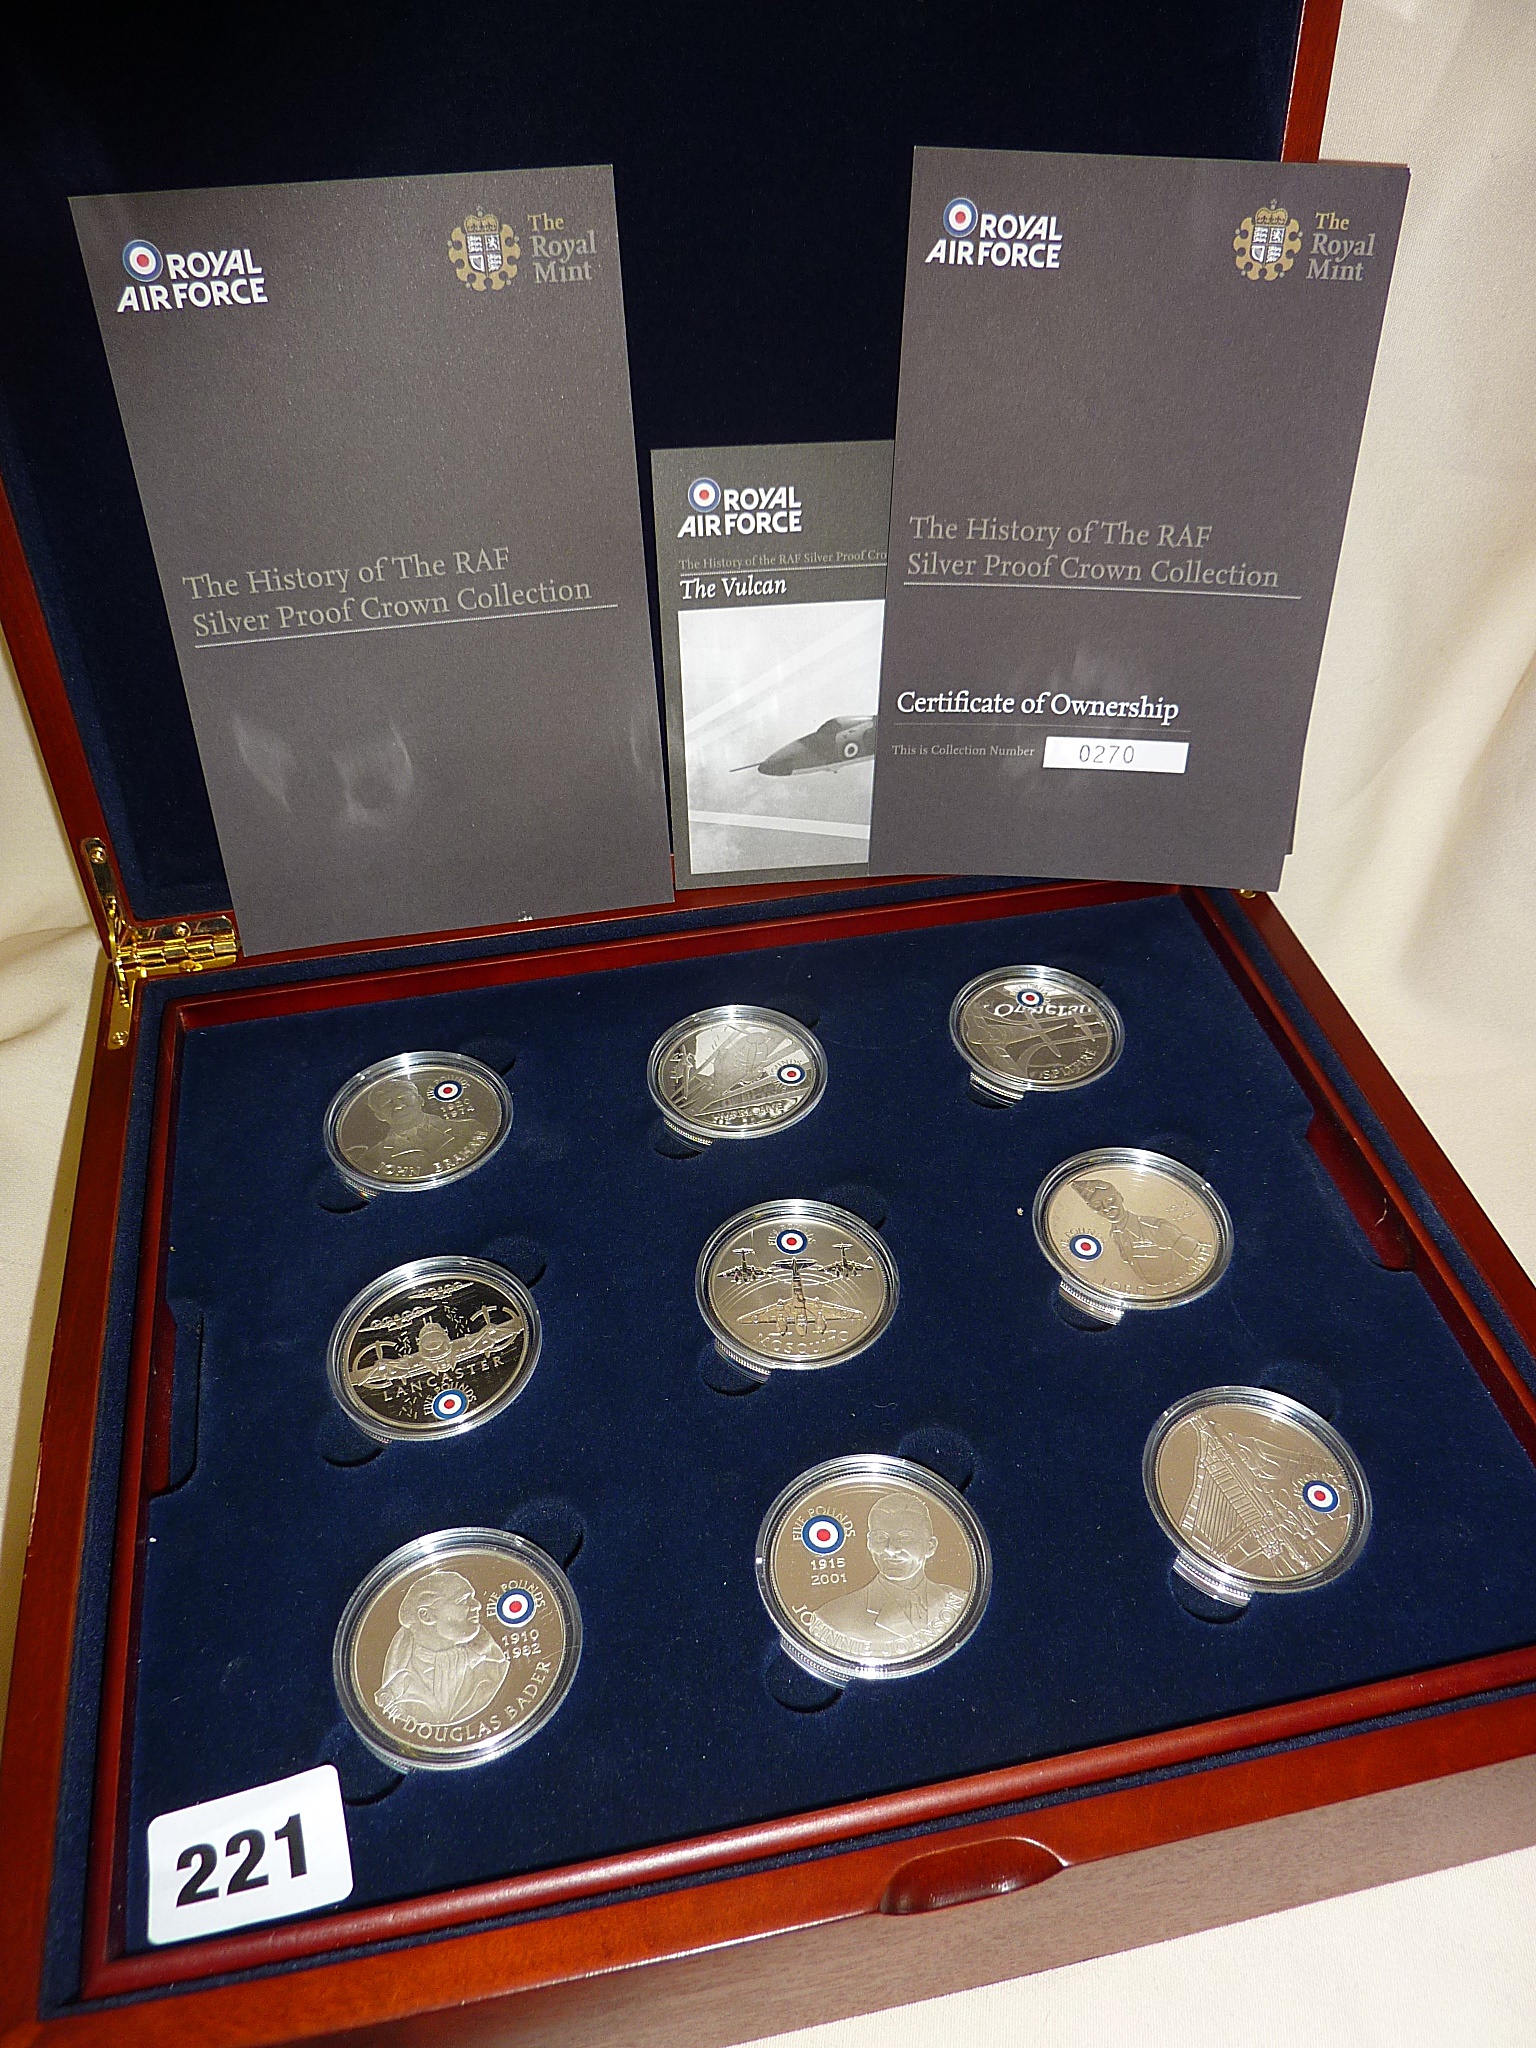 Royal Mint - The History of the RAF Silver Proof coin collection 2008 - 18 coin set in wooden box